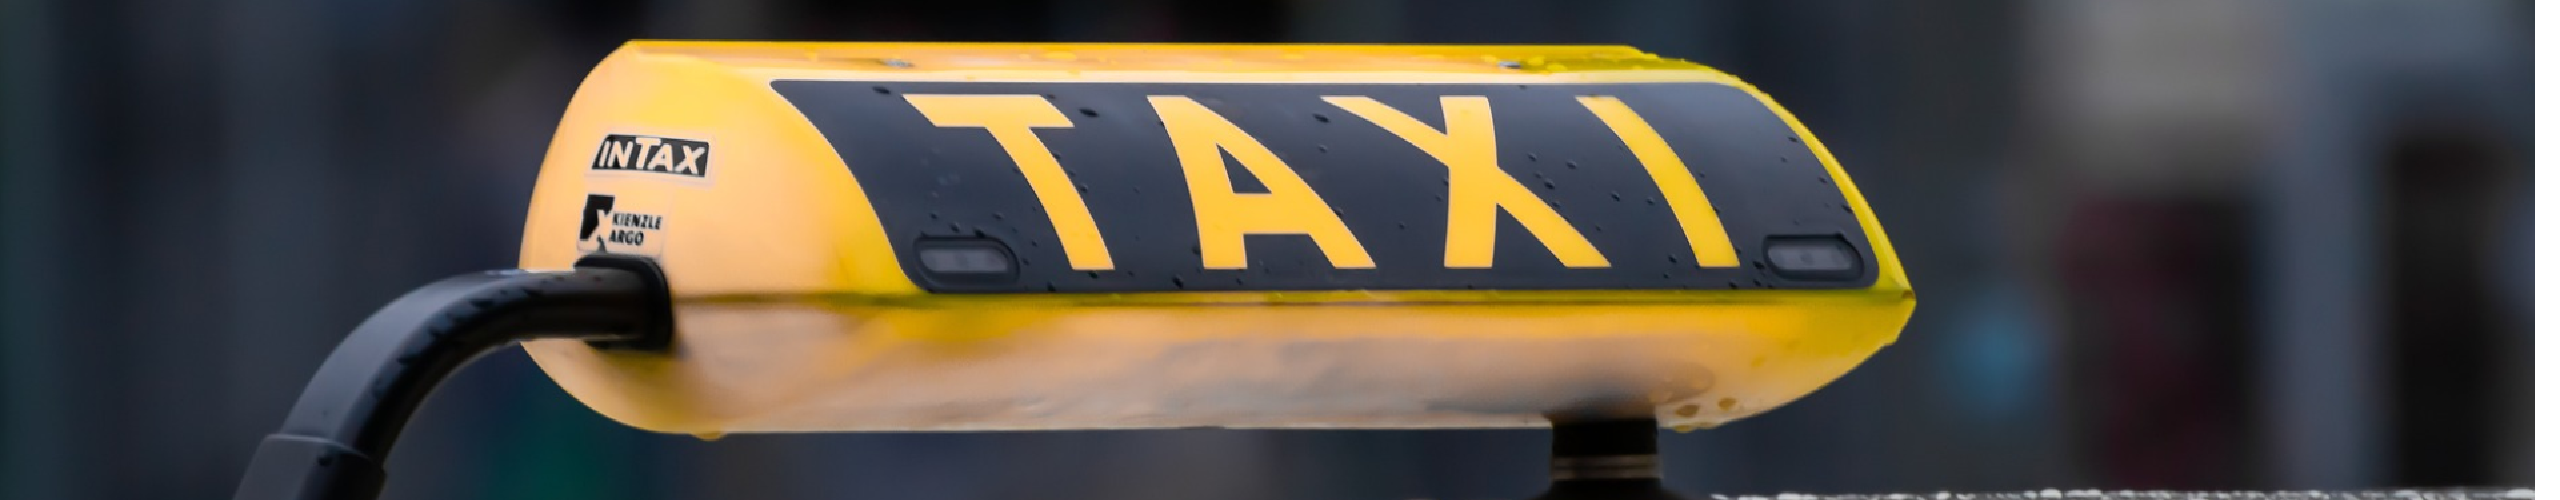 Taxi chat panel background